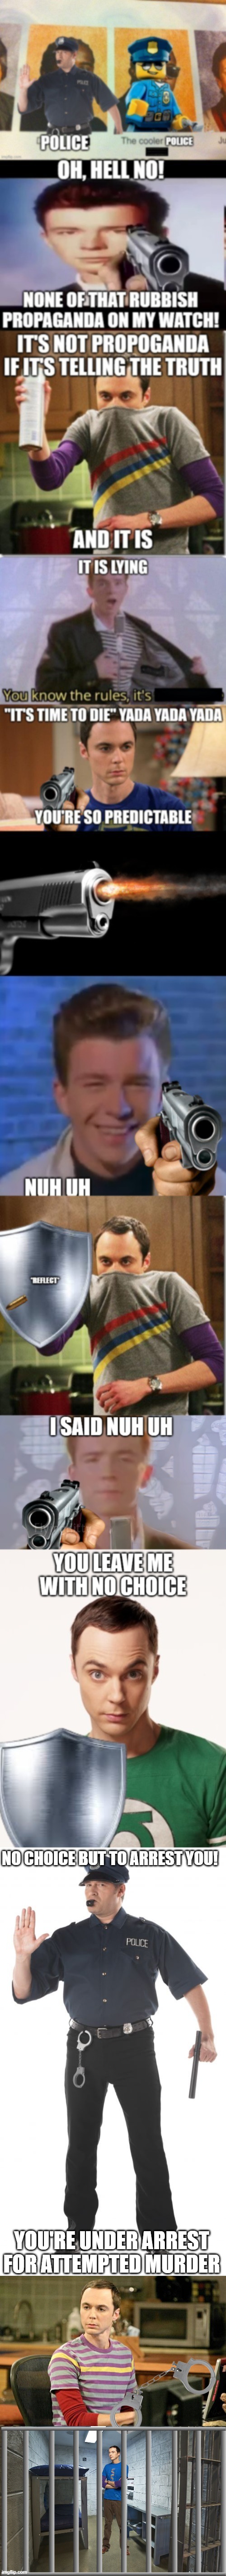 NO CHOICE BUT TO ARREST YOU! YOU'RE UNDER ARREST FOR ATTEMPTED MURDER | image tagged in memes,stop cop,dr sheldon cooper,jail cell | made w/ Imgflip meme maker